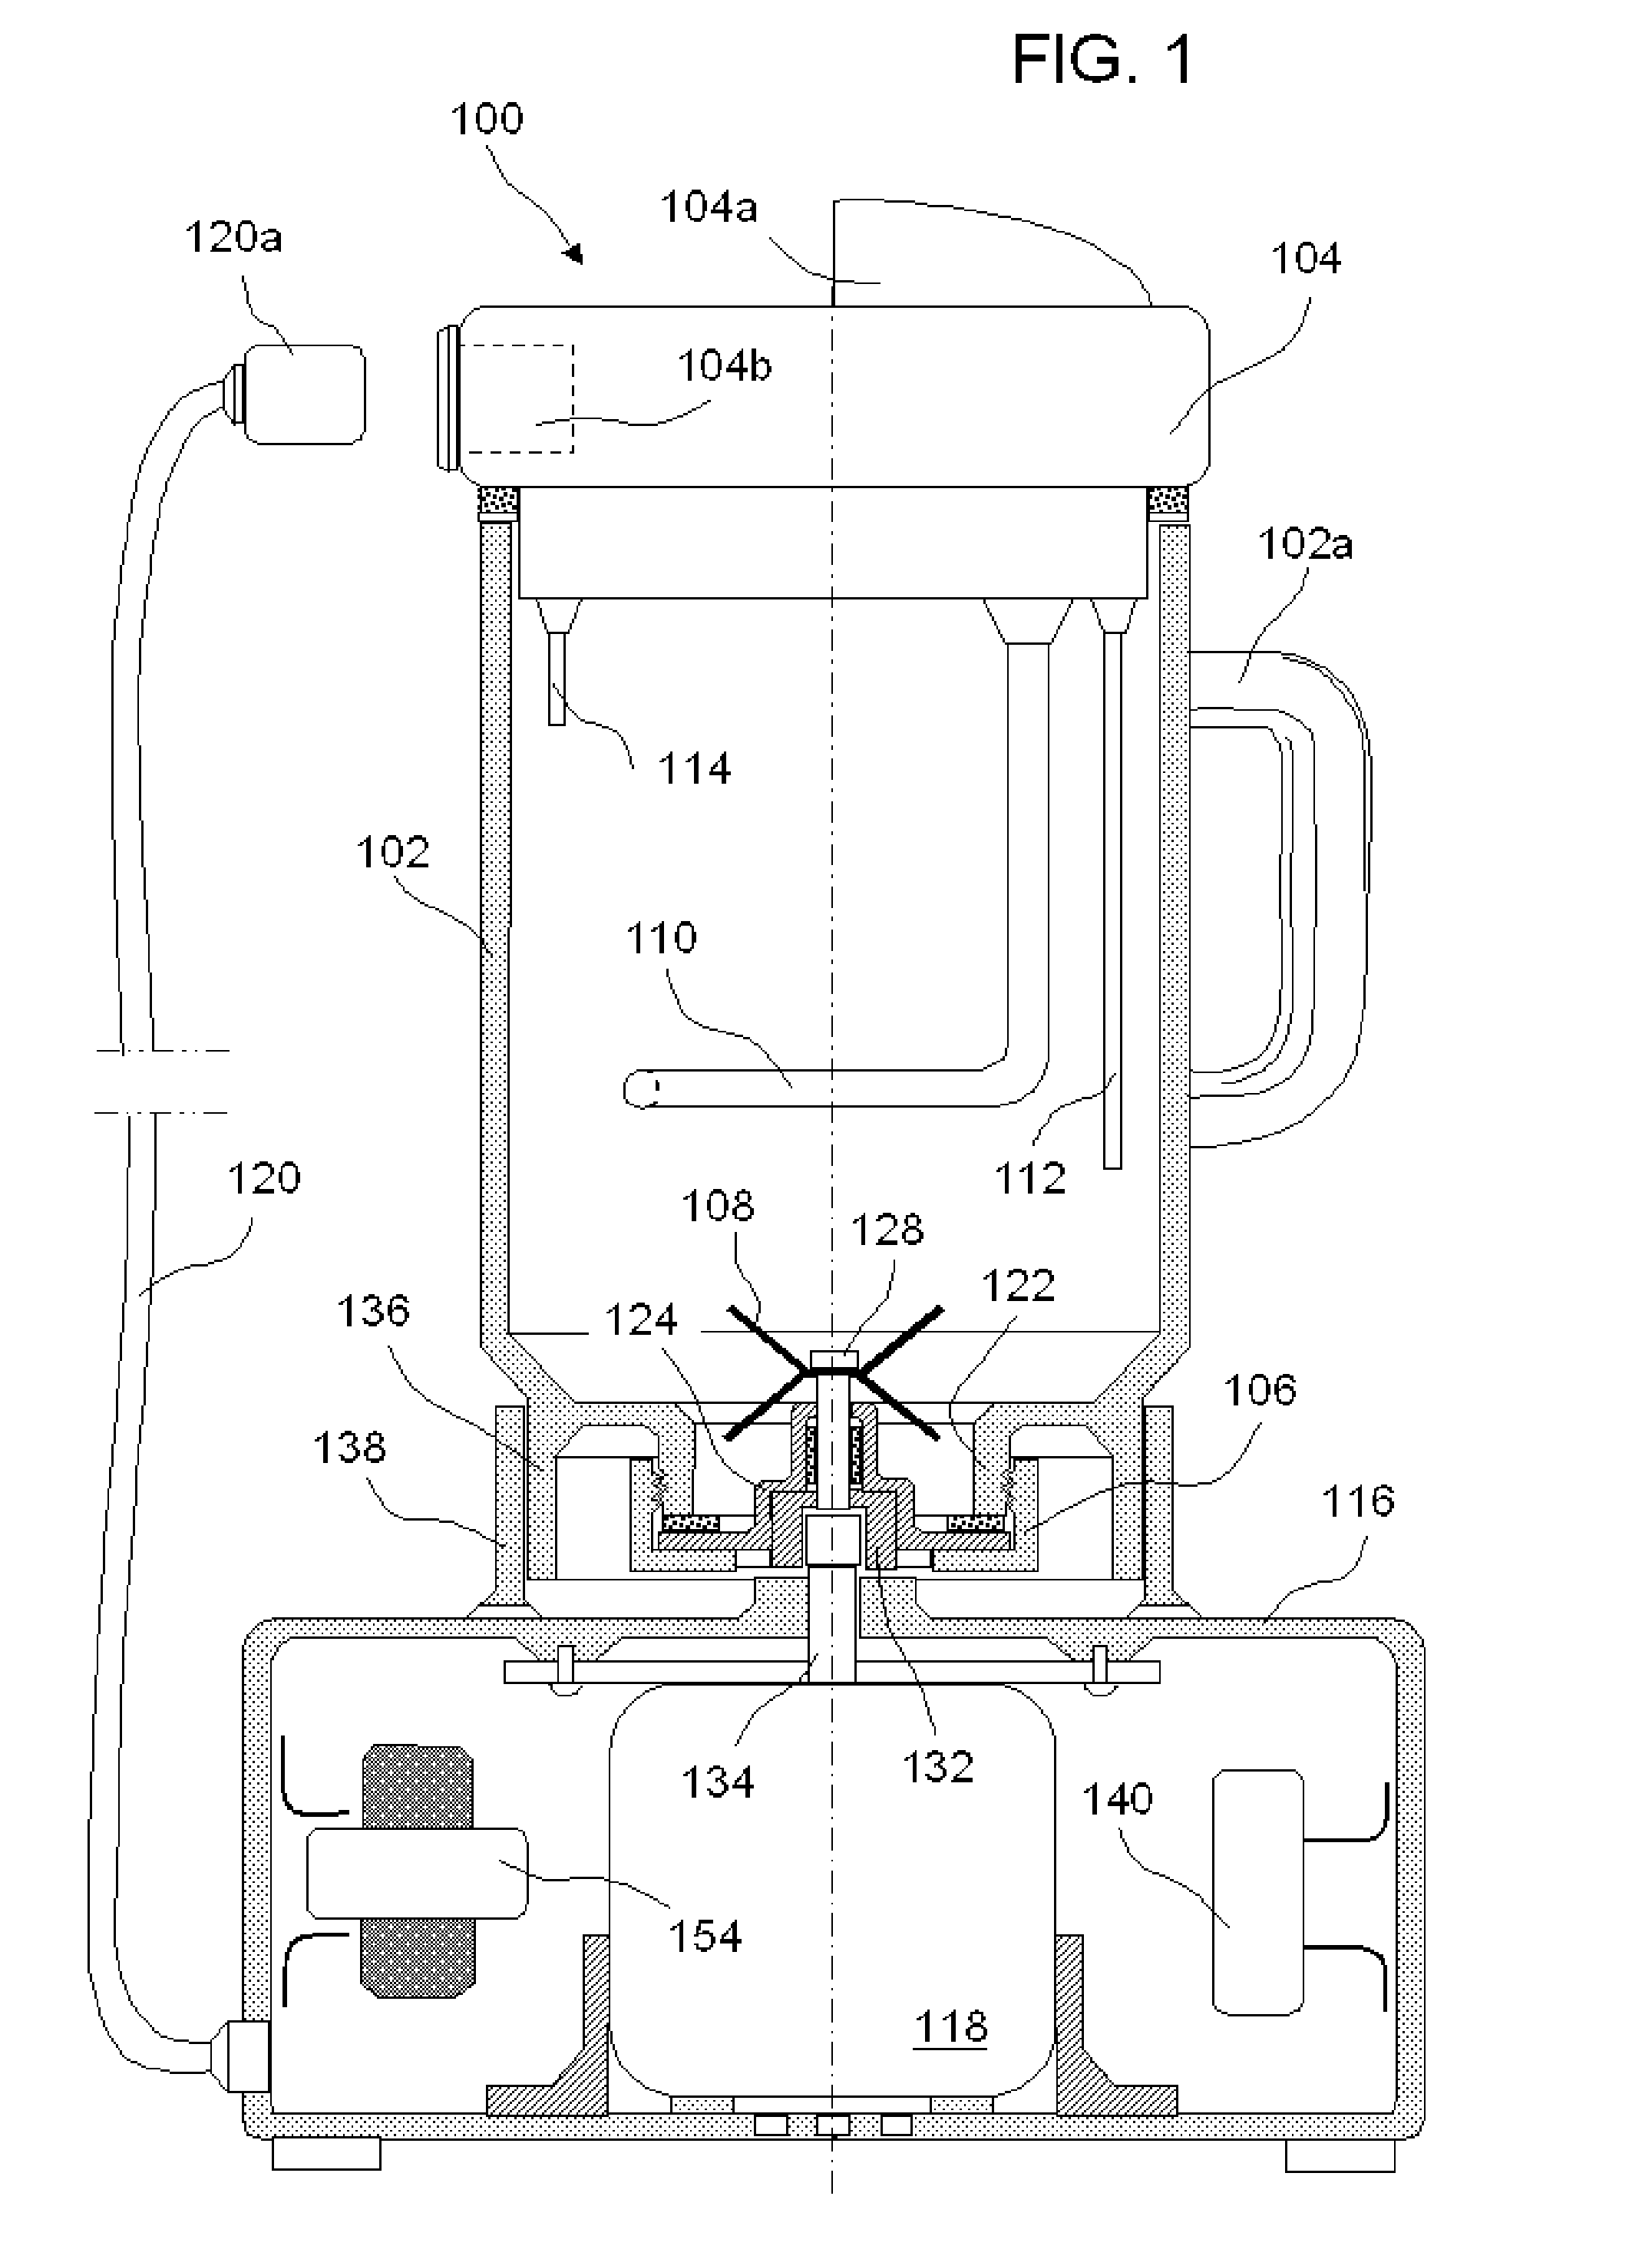 Automated Soup Making Apparatus